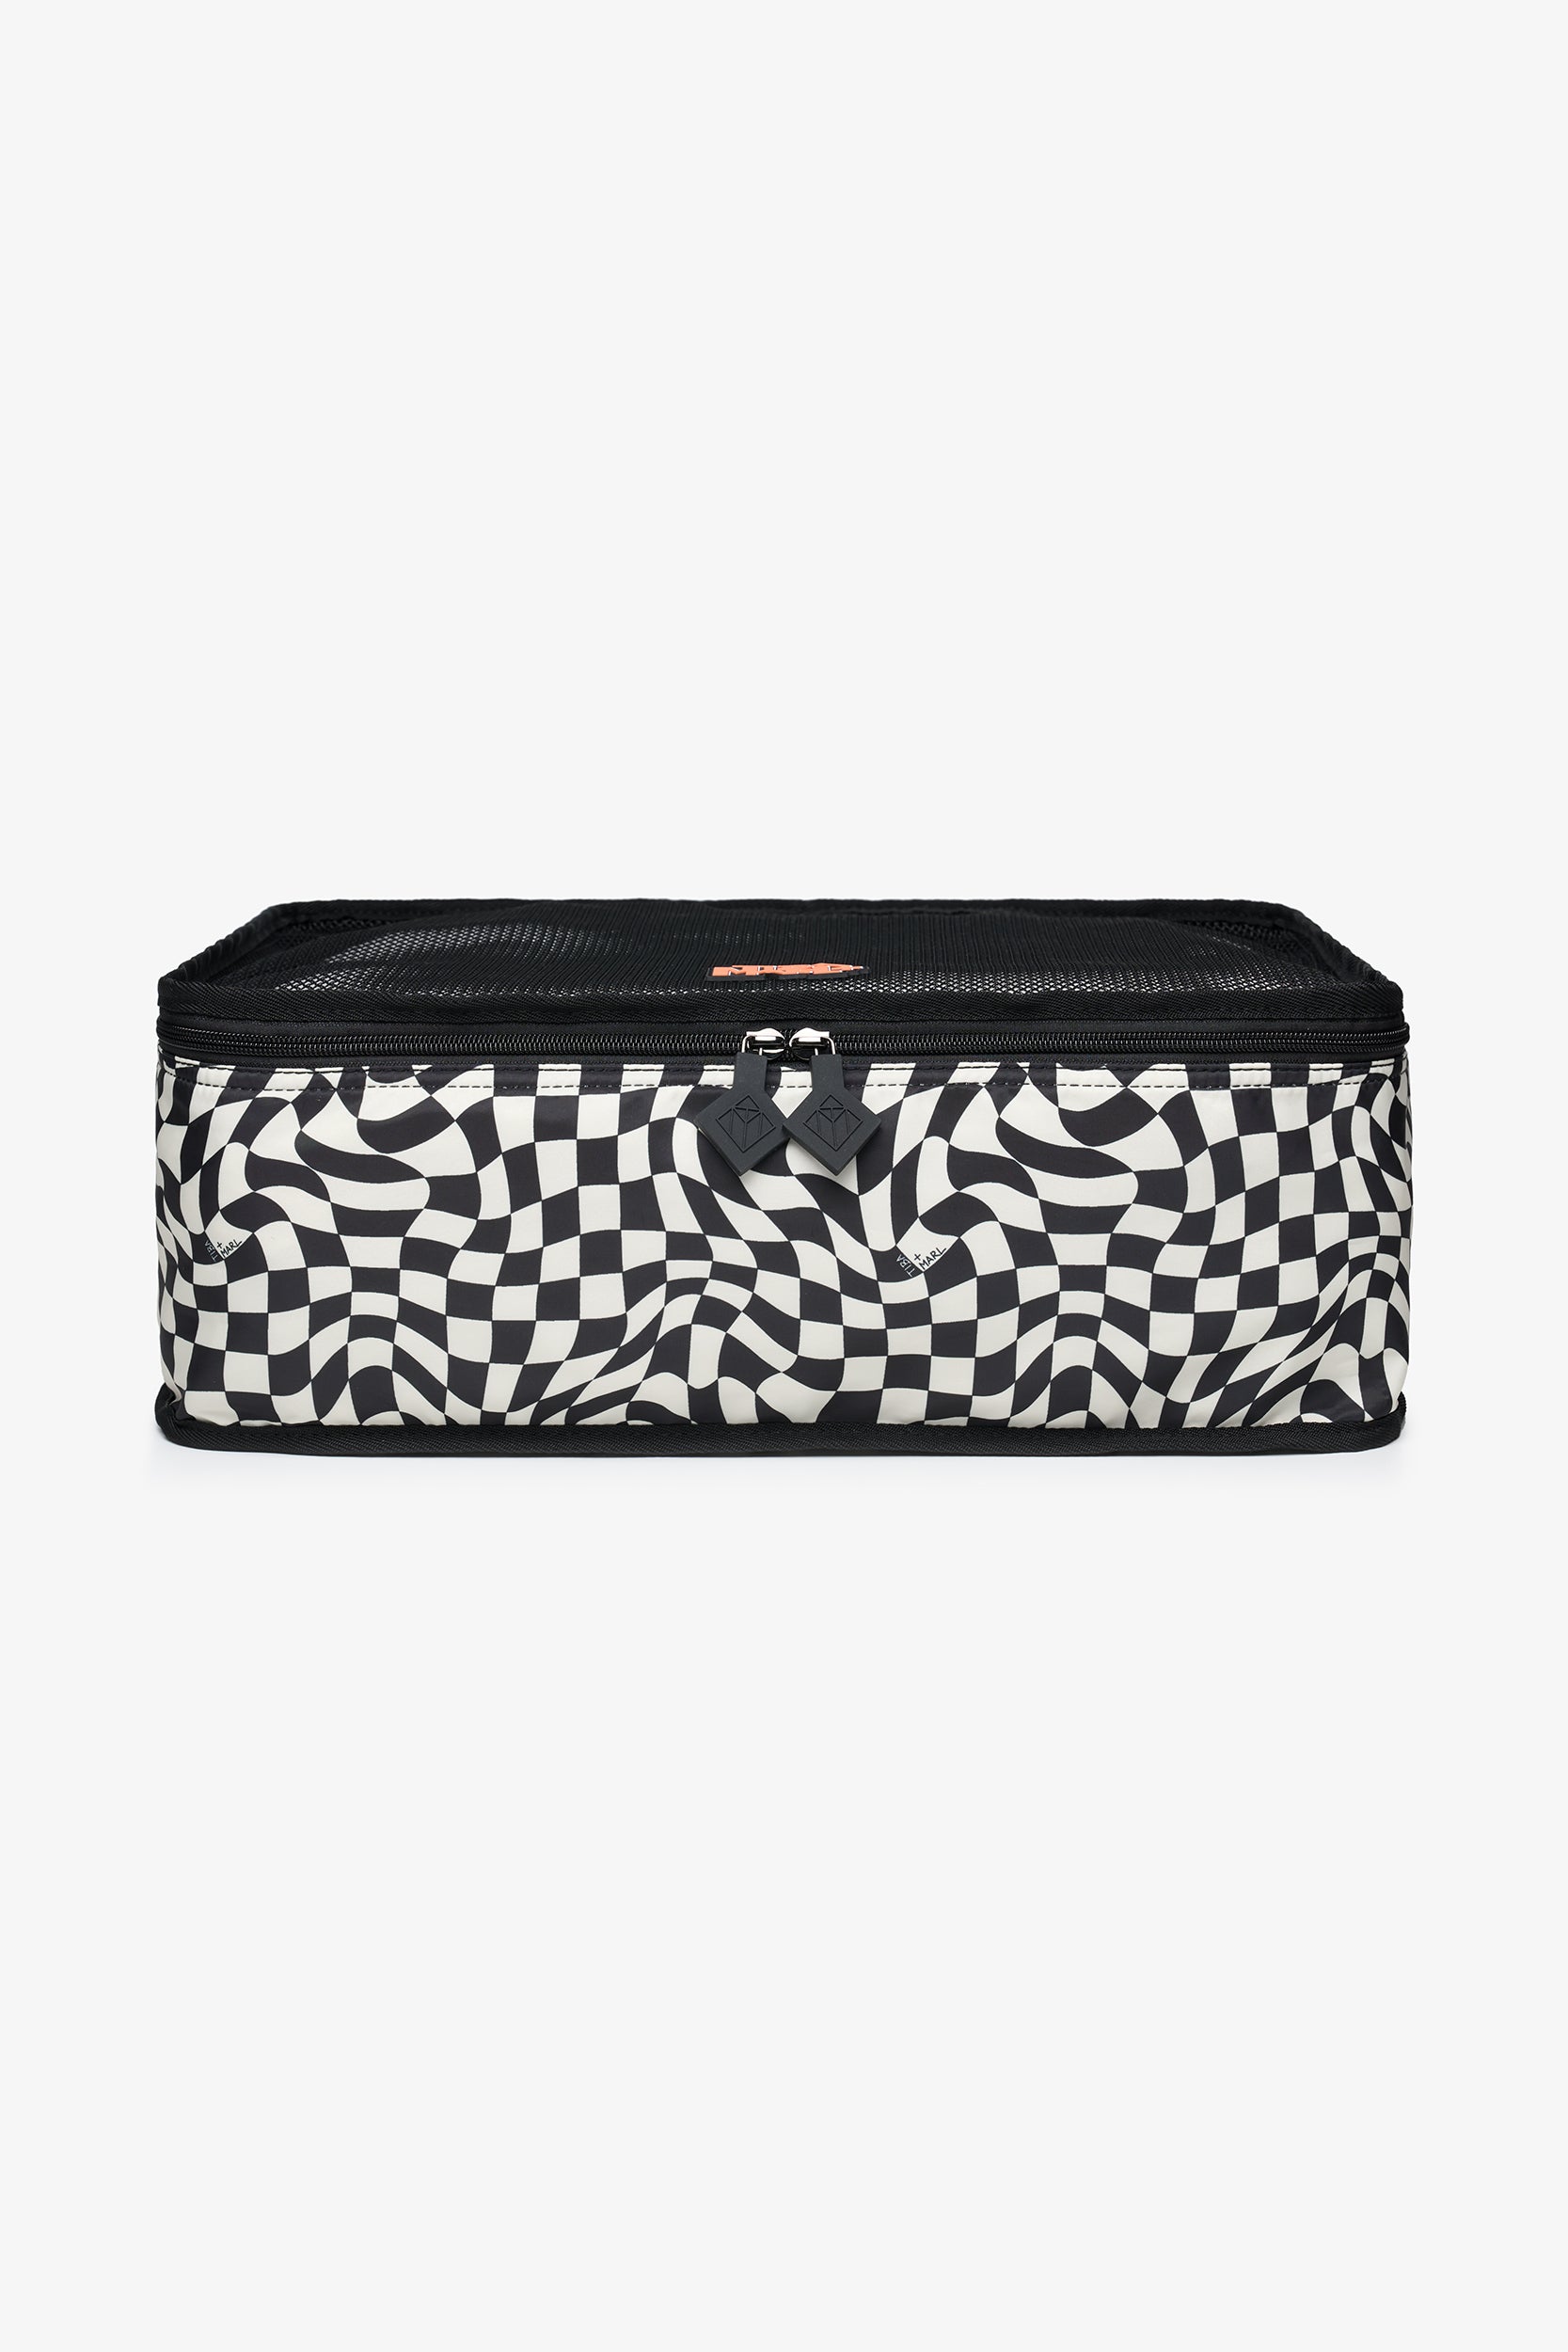 T+M Packing Cubes Set Mixed Wavy Checkerboard Print